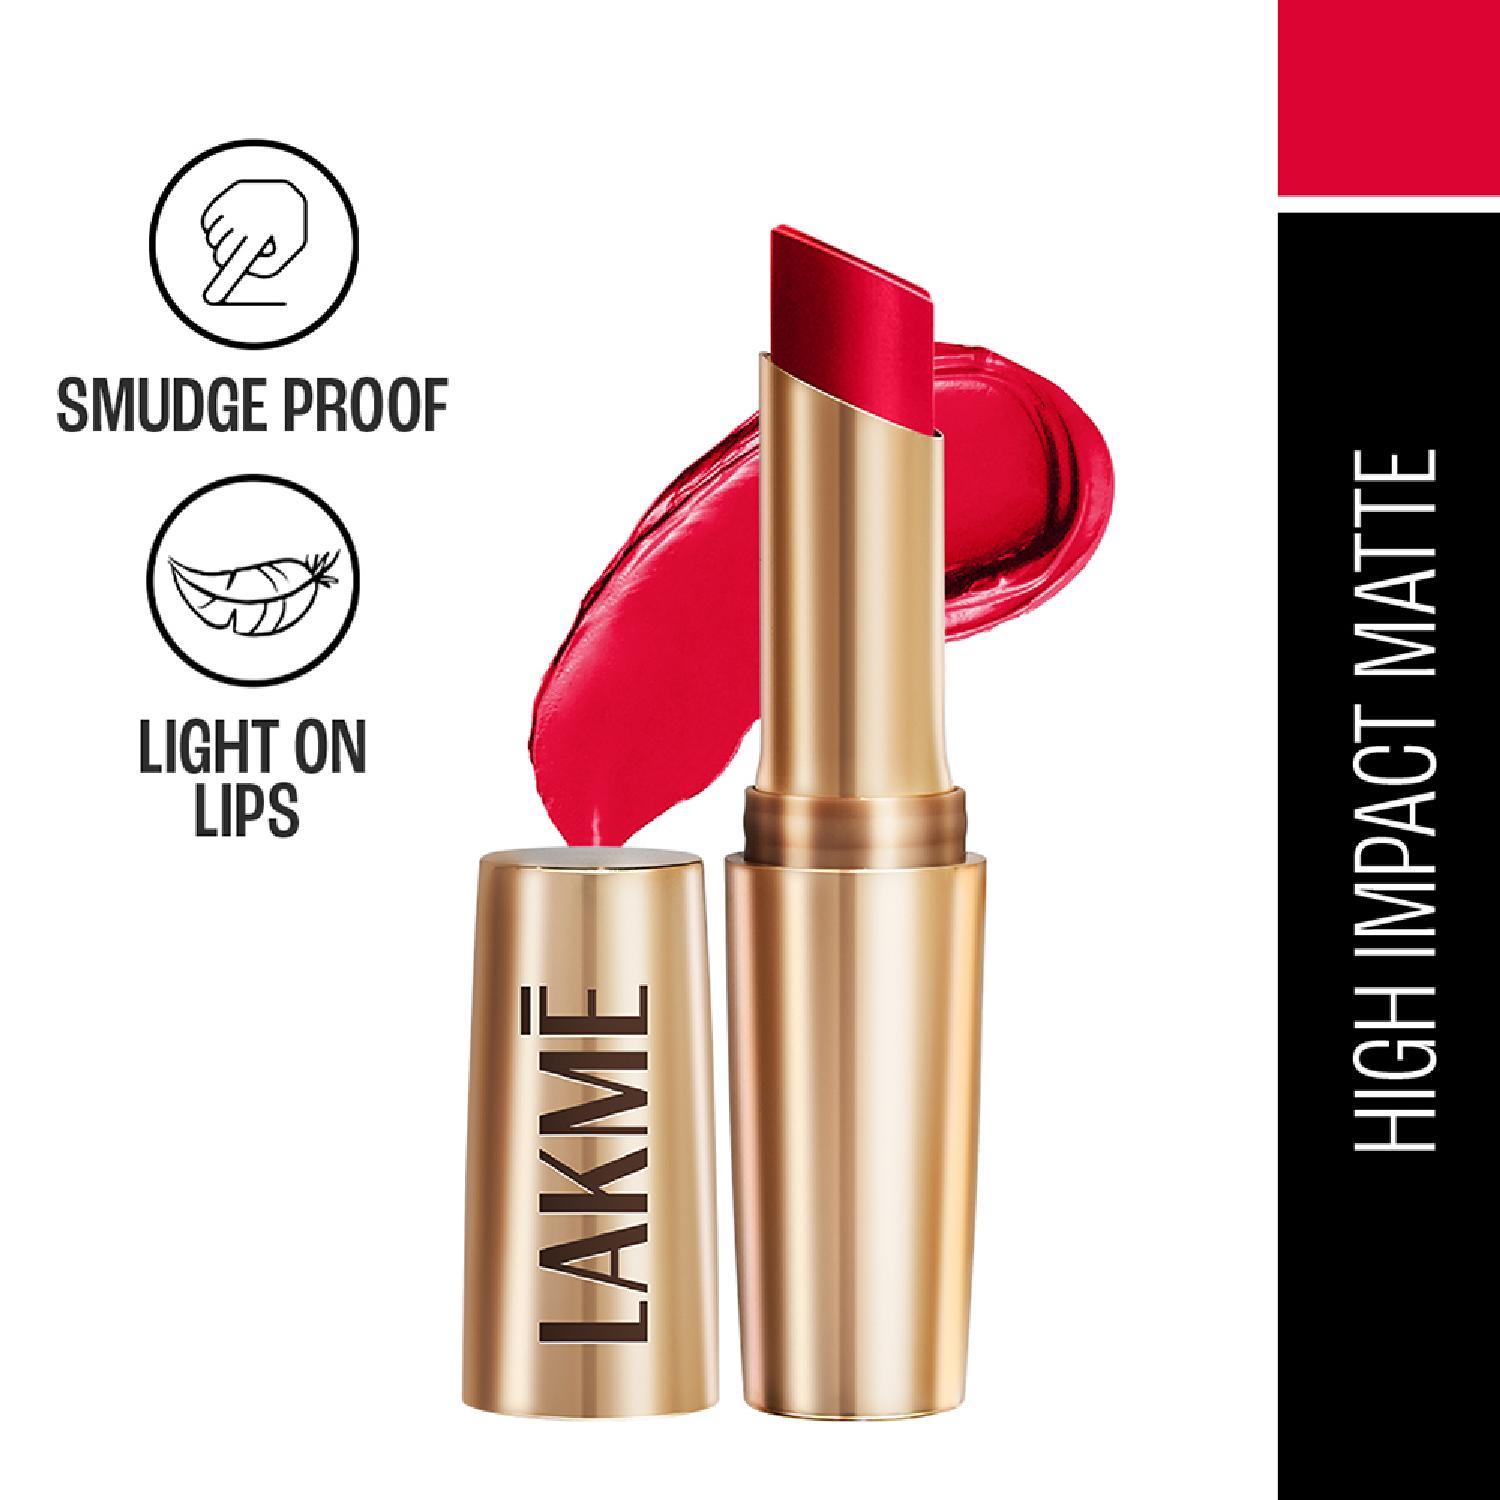 Lakme | Lakme 9 to 5 Powerplay Priming Matte Lipstick, Lasts 16hrs, Red Coat (3.6g)